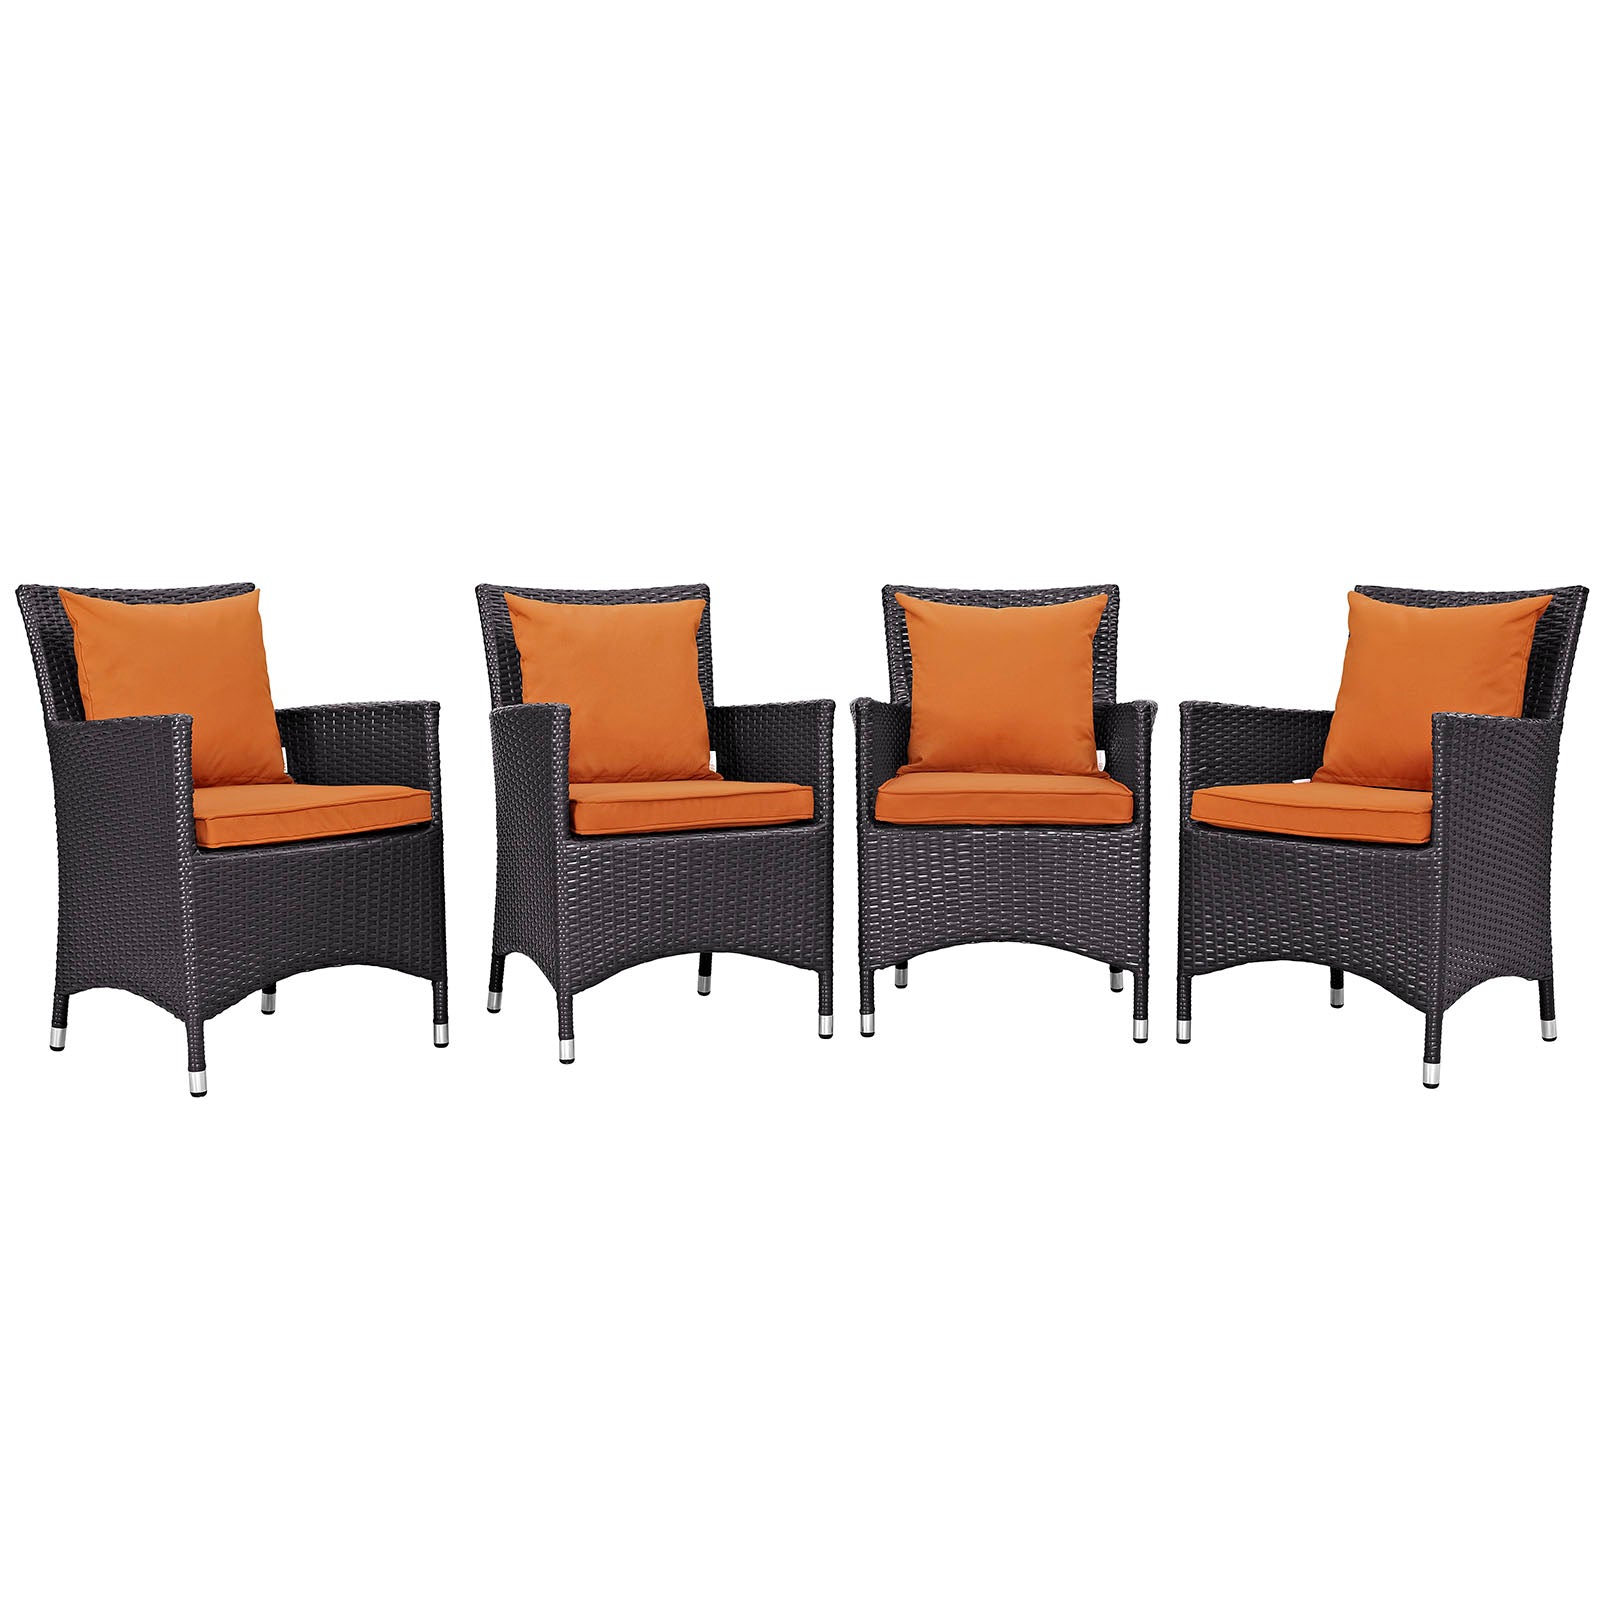 Convene 4 Piece Outdoor Patio Dining Set-Outdoor Dining Set-Modway-Wall2Wall Furnishings